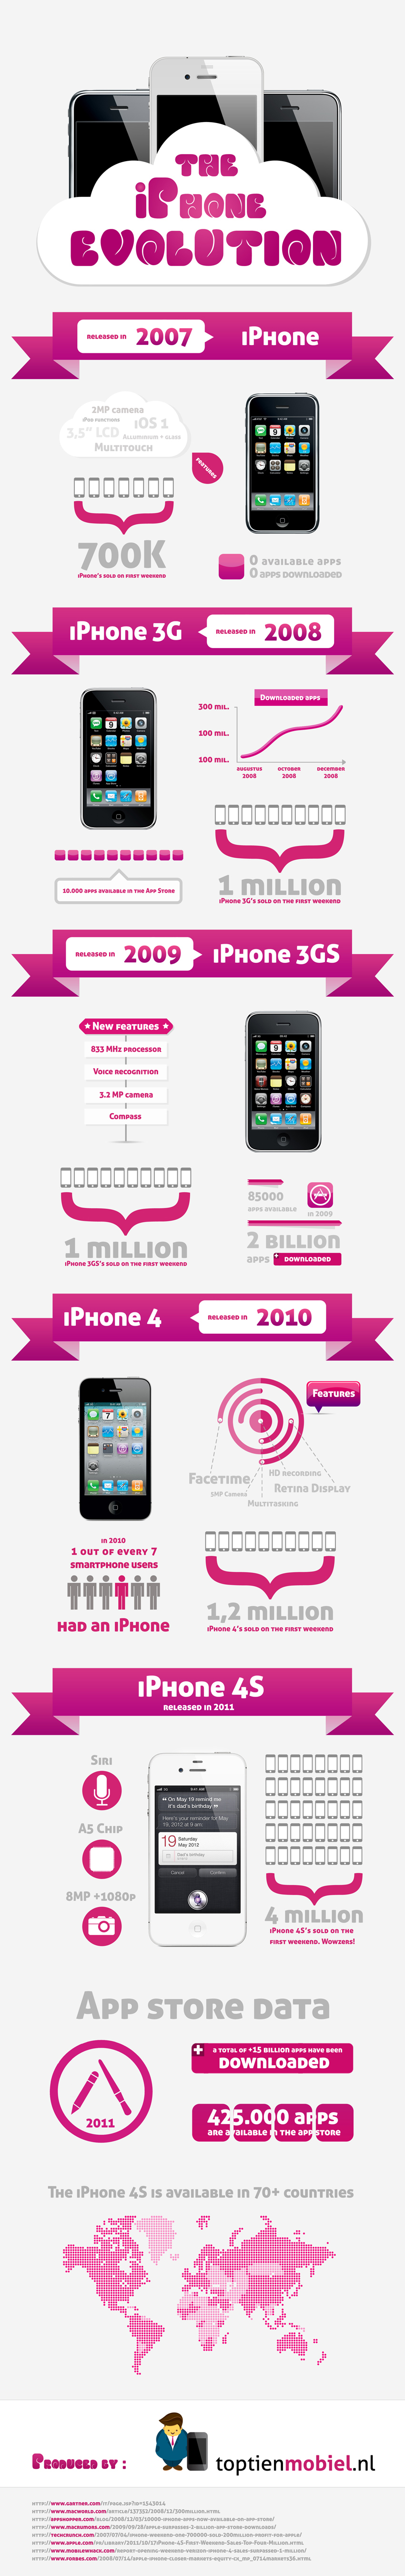 The iPhone Evolution [InfoGraphic]